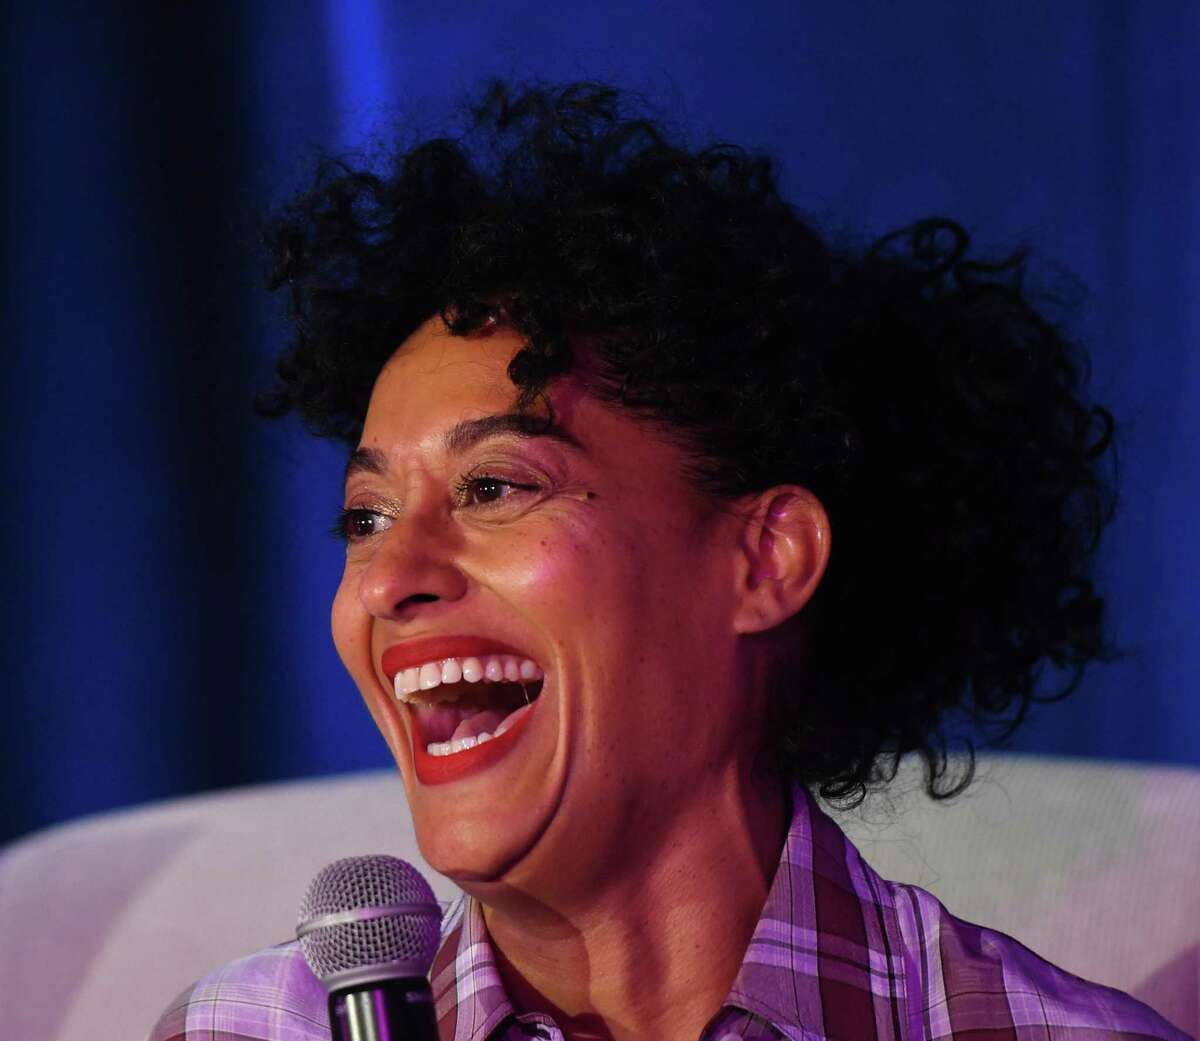 Actress, producer and activist Tracee Ellis Ross delivers the keynote conversation at Fairfield County’s Community Foundation Fund for Women & Girls annual luncheon at the Hyatt Regency in Old Greenwich, Conn. Thursday, April 4, 2019. Ross is known for her lead role on ABC's "black-ish" and has won a Golden Globe along with several NAACP Image Awards for her work.